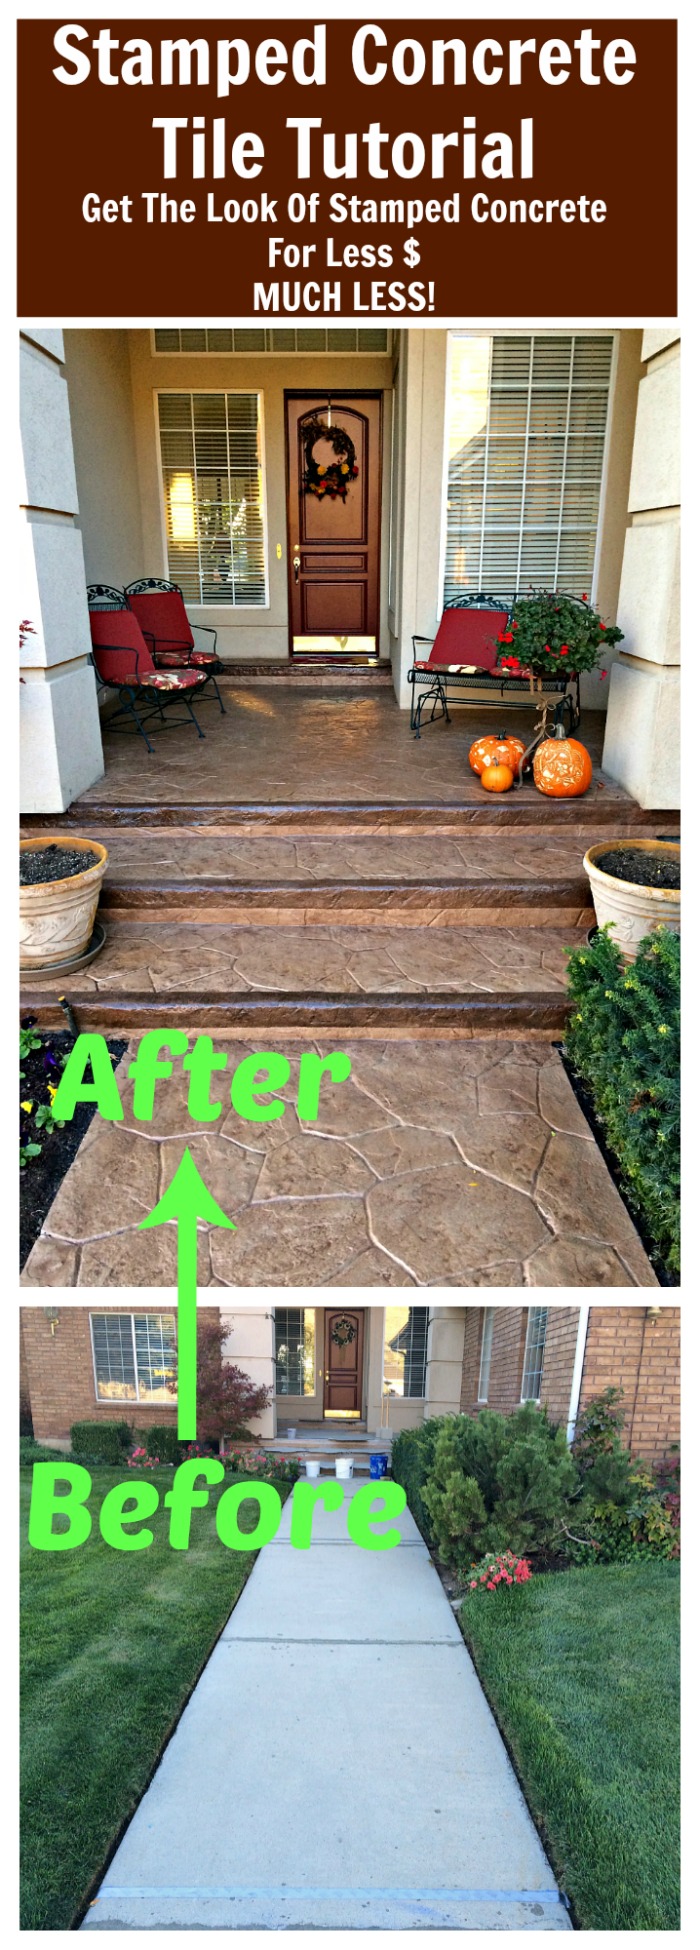 DIY STAMPED CONCRETE TILE TUTORIAL - Get the look of stamped concrete for less $, MUCH LESS!